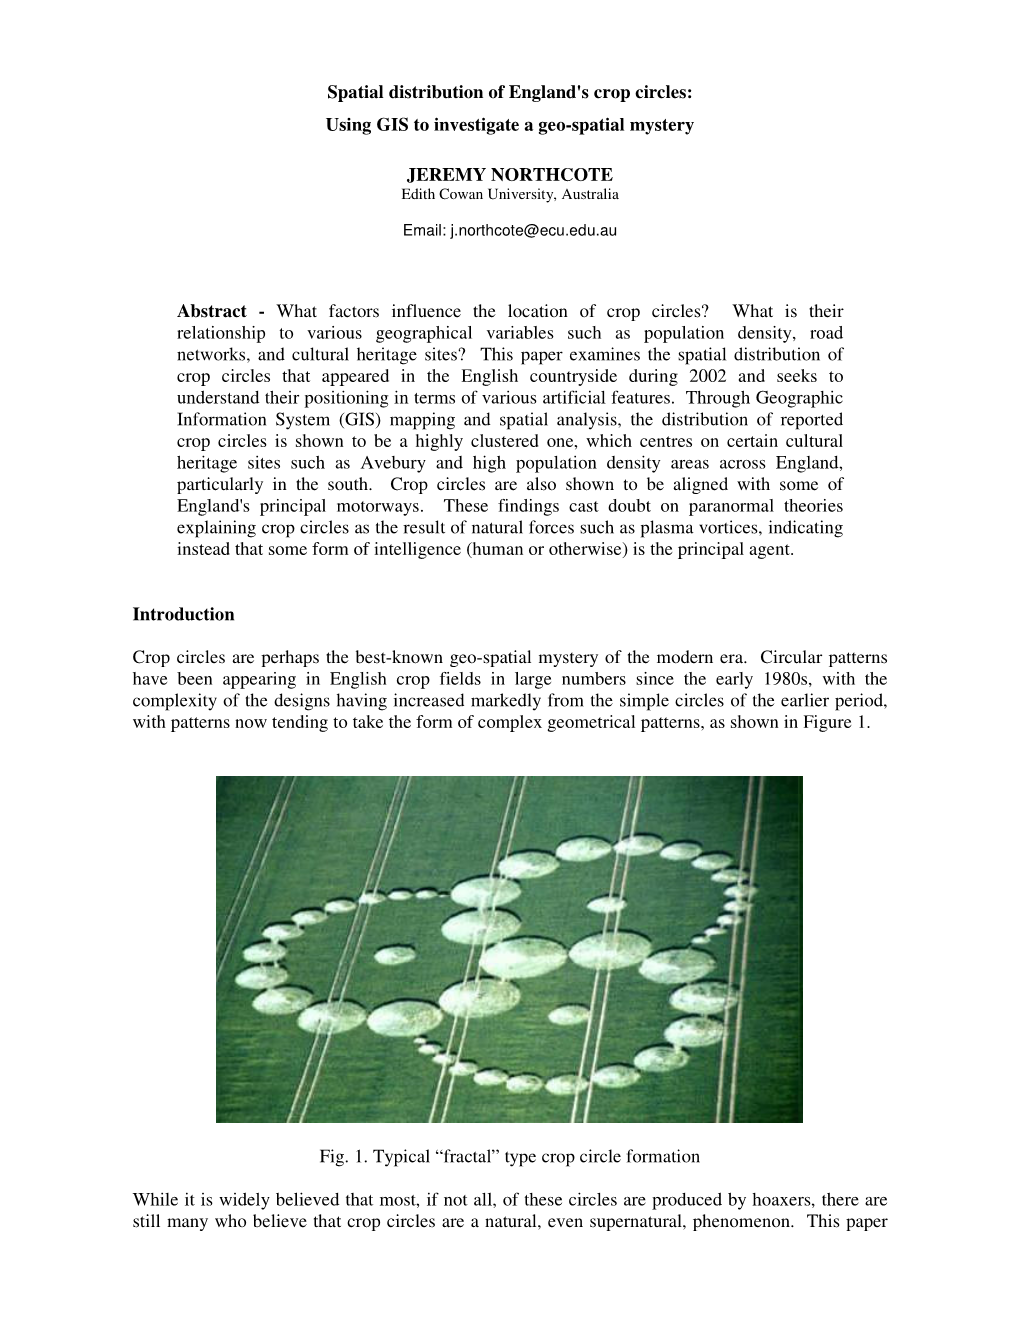 Spatial Distribution of England's Crop Circles: Using GIS to Investigate a Geo-Spatial Mystery